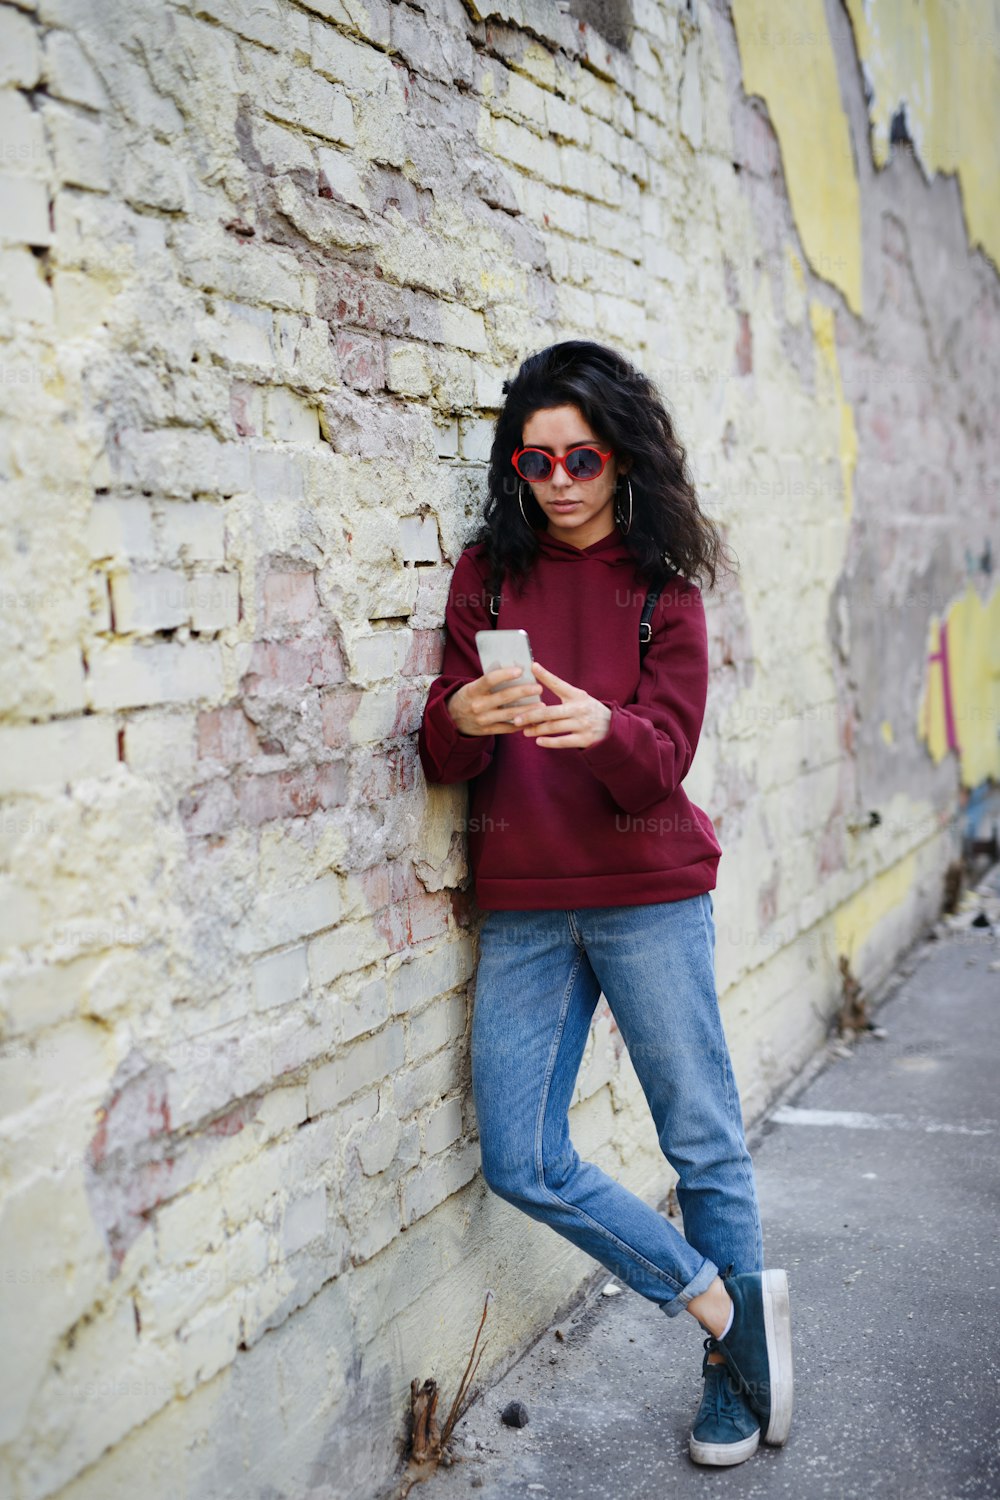 A portrait of young woman standing outdoors on street in city, using smartphone.